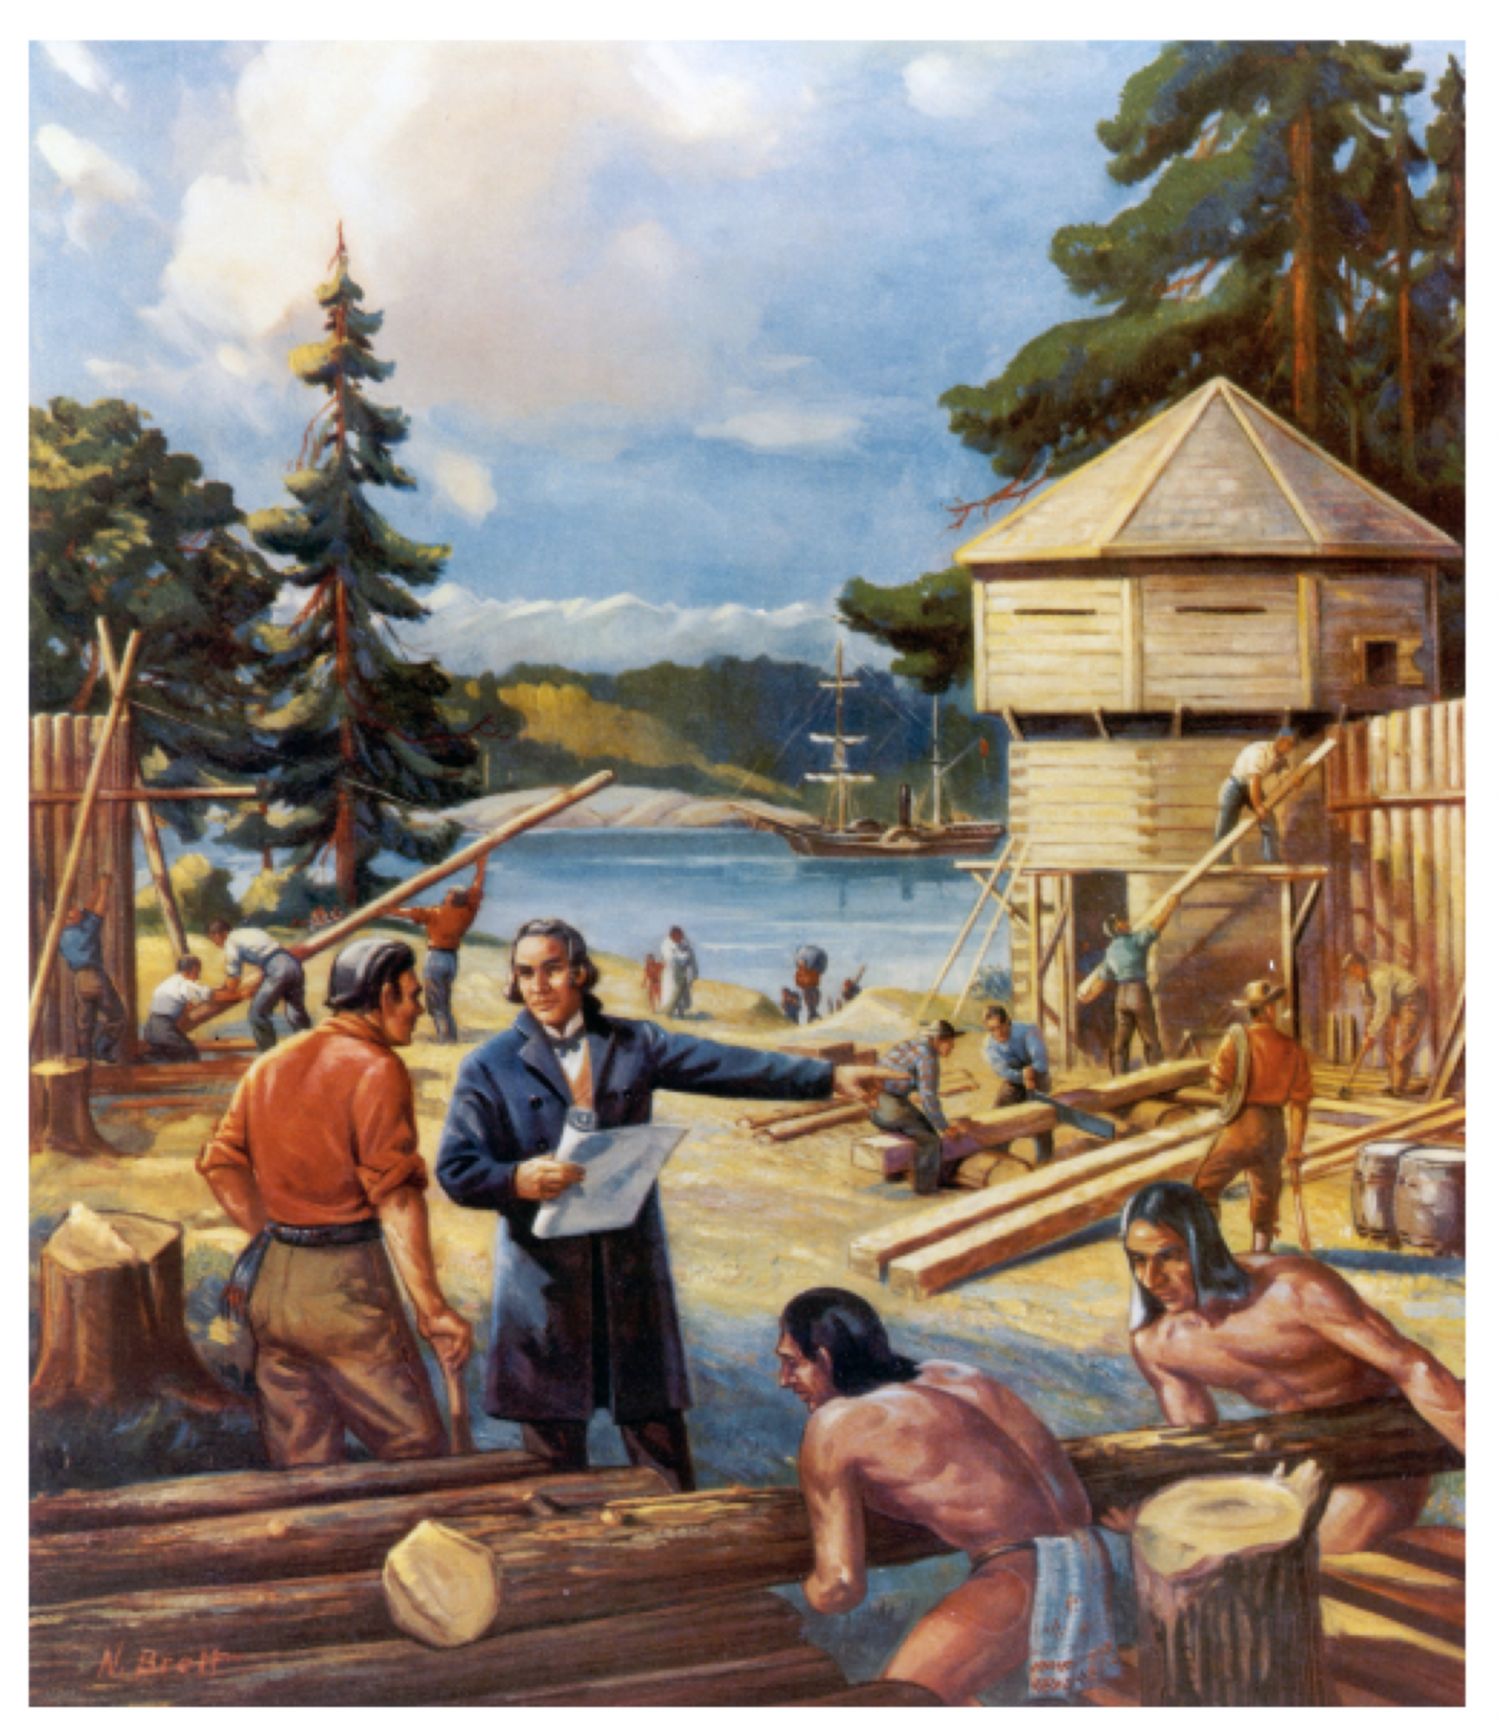 The founding of Fort Victoria - 1943 painting